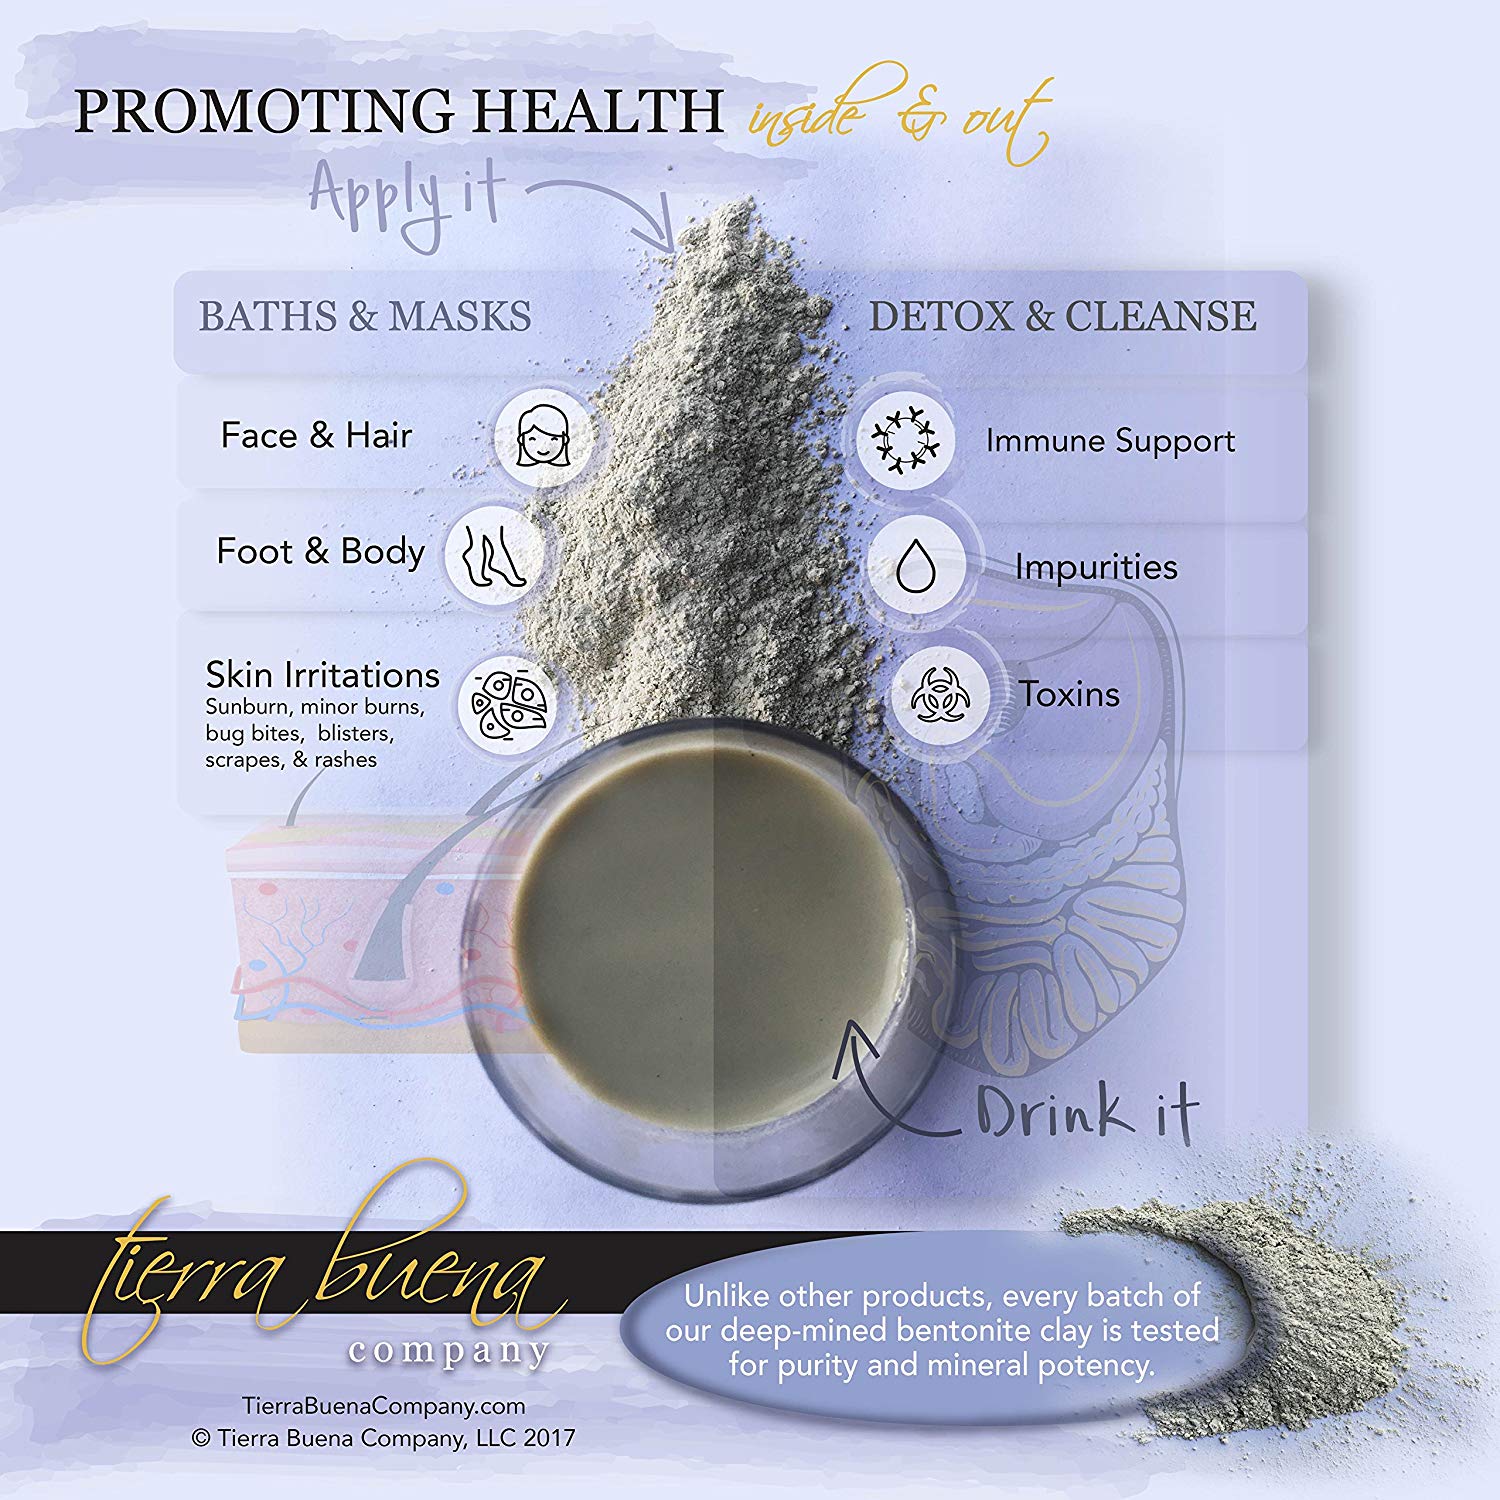 Health and detox benefits using the #1 premium food grade edible Tierra Buena Pure Clay for effective detox support.